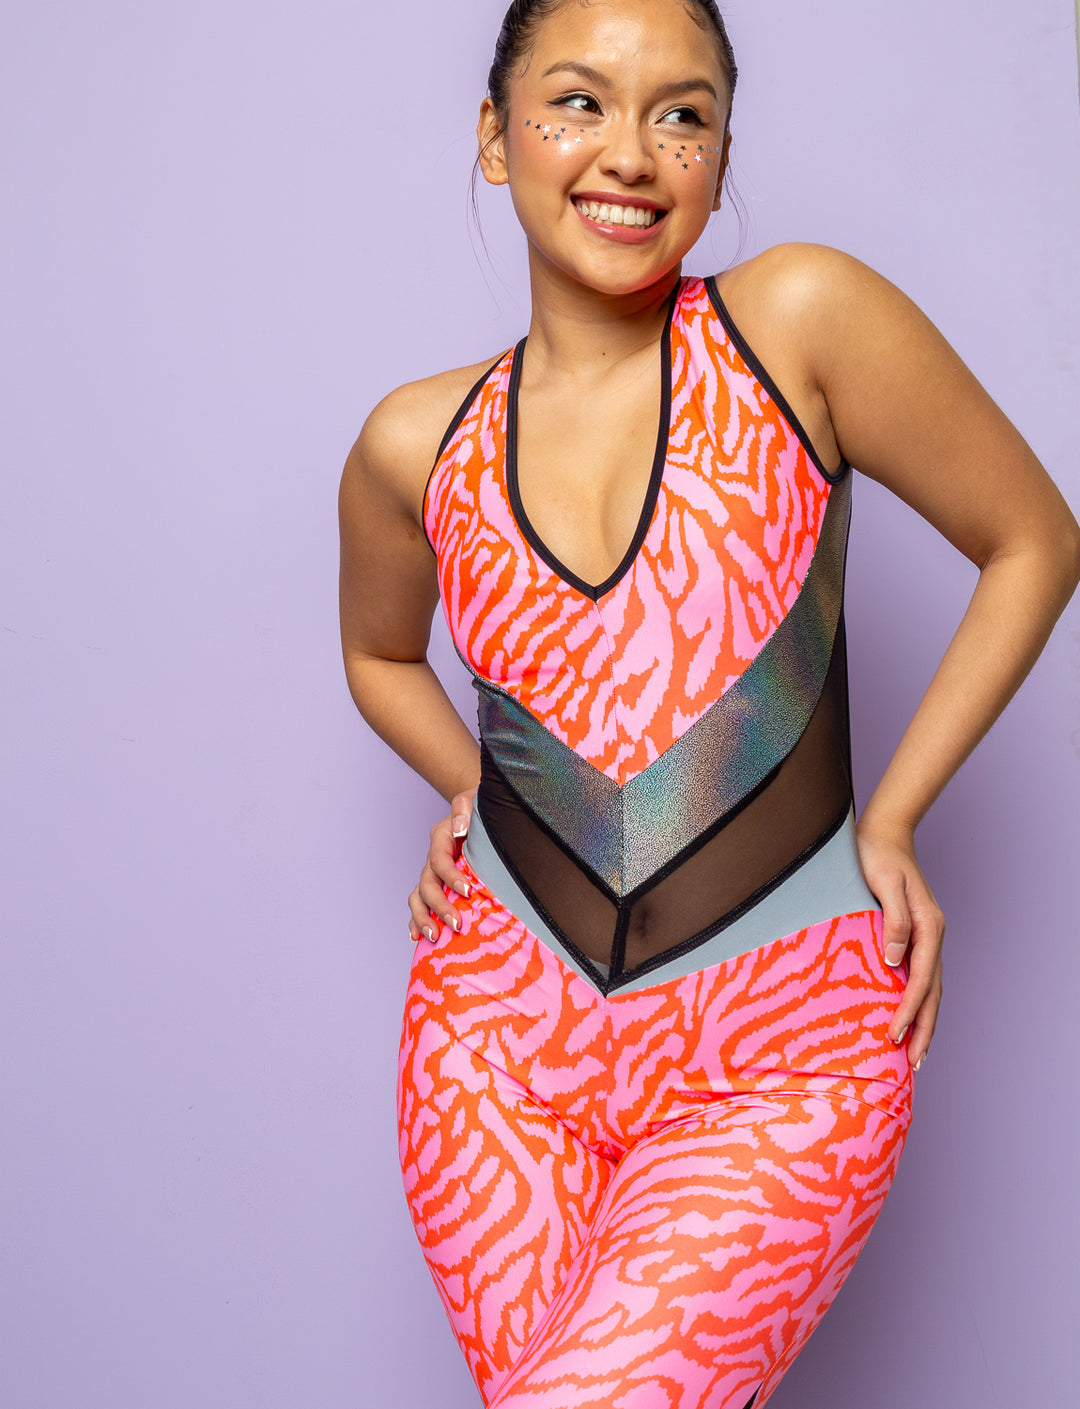 Woman wearing a pink zebra print catsuit with mesh panels.